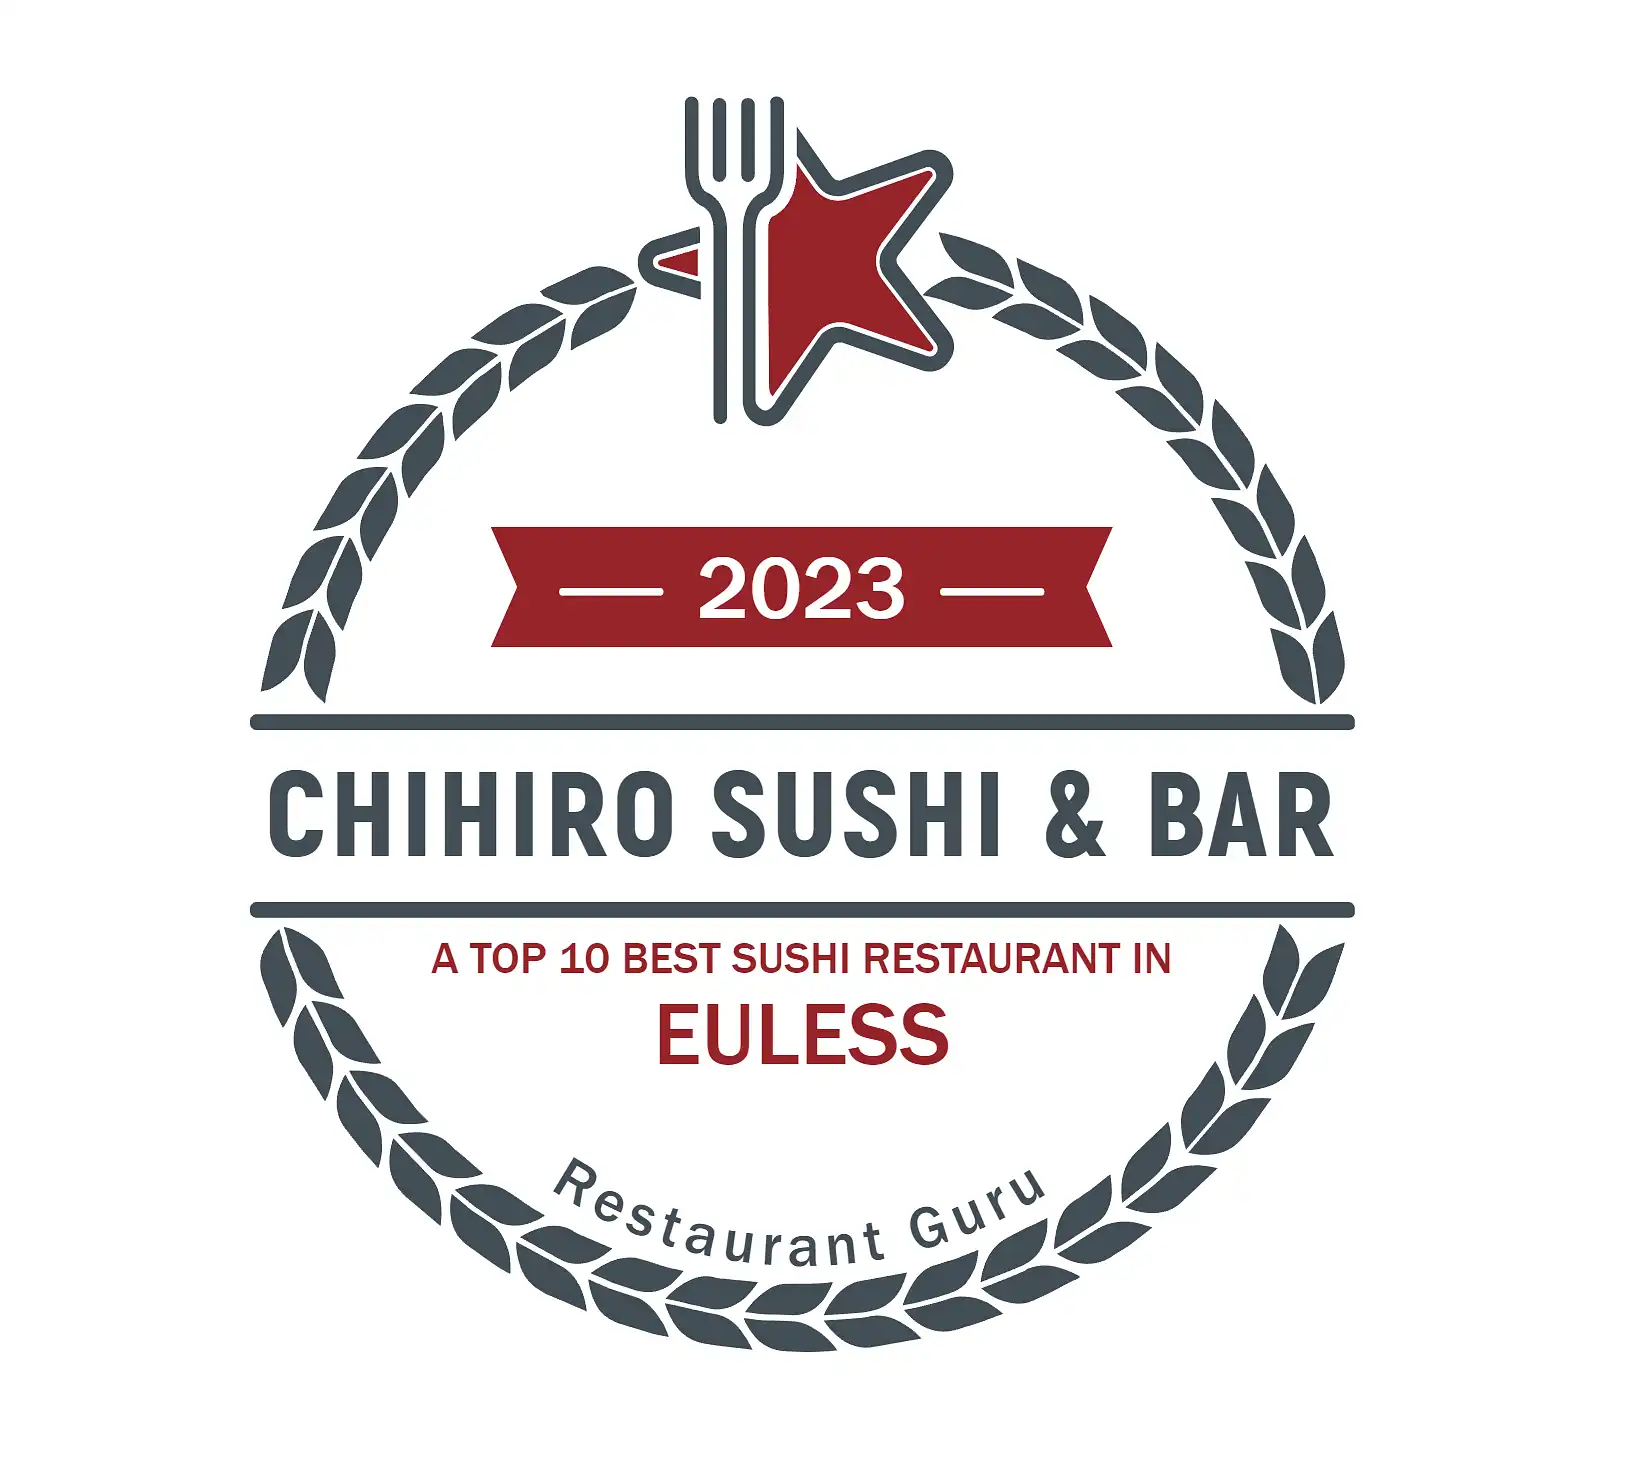 “Chihiro Sushi & Bar voted for top 10 Sushi restaurants in Euless